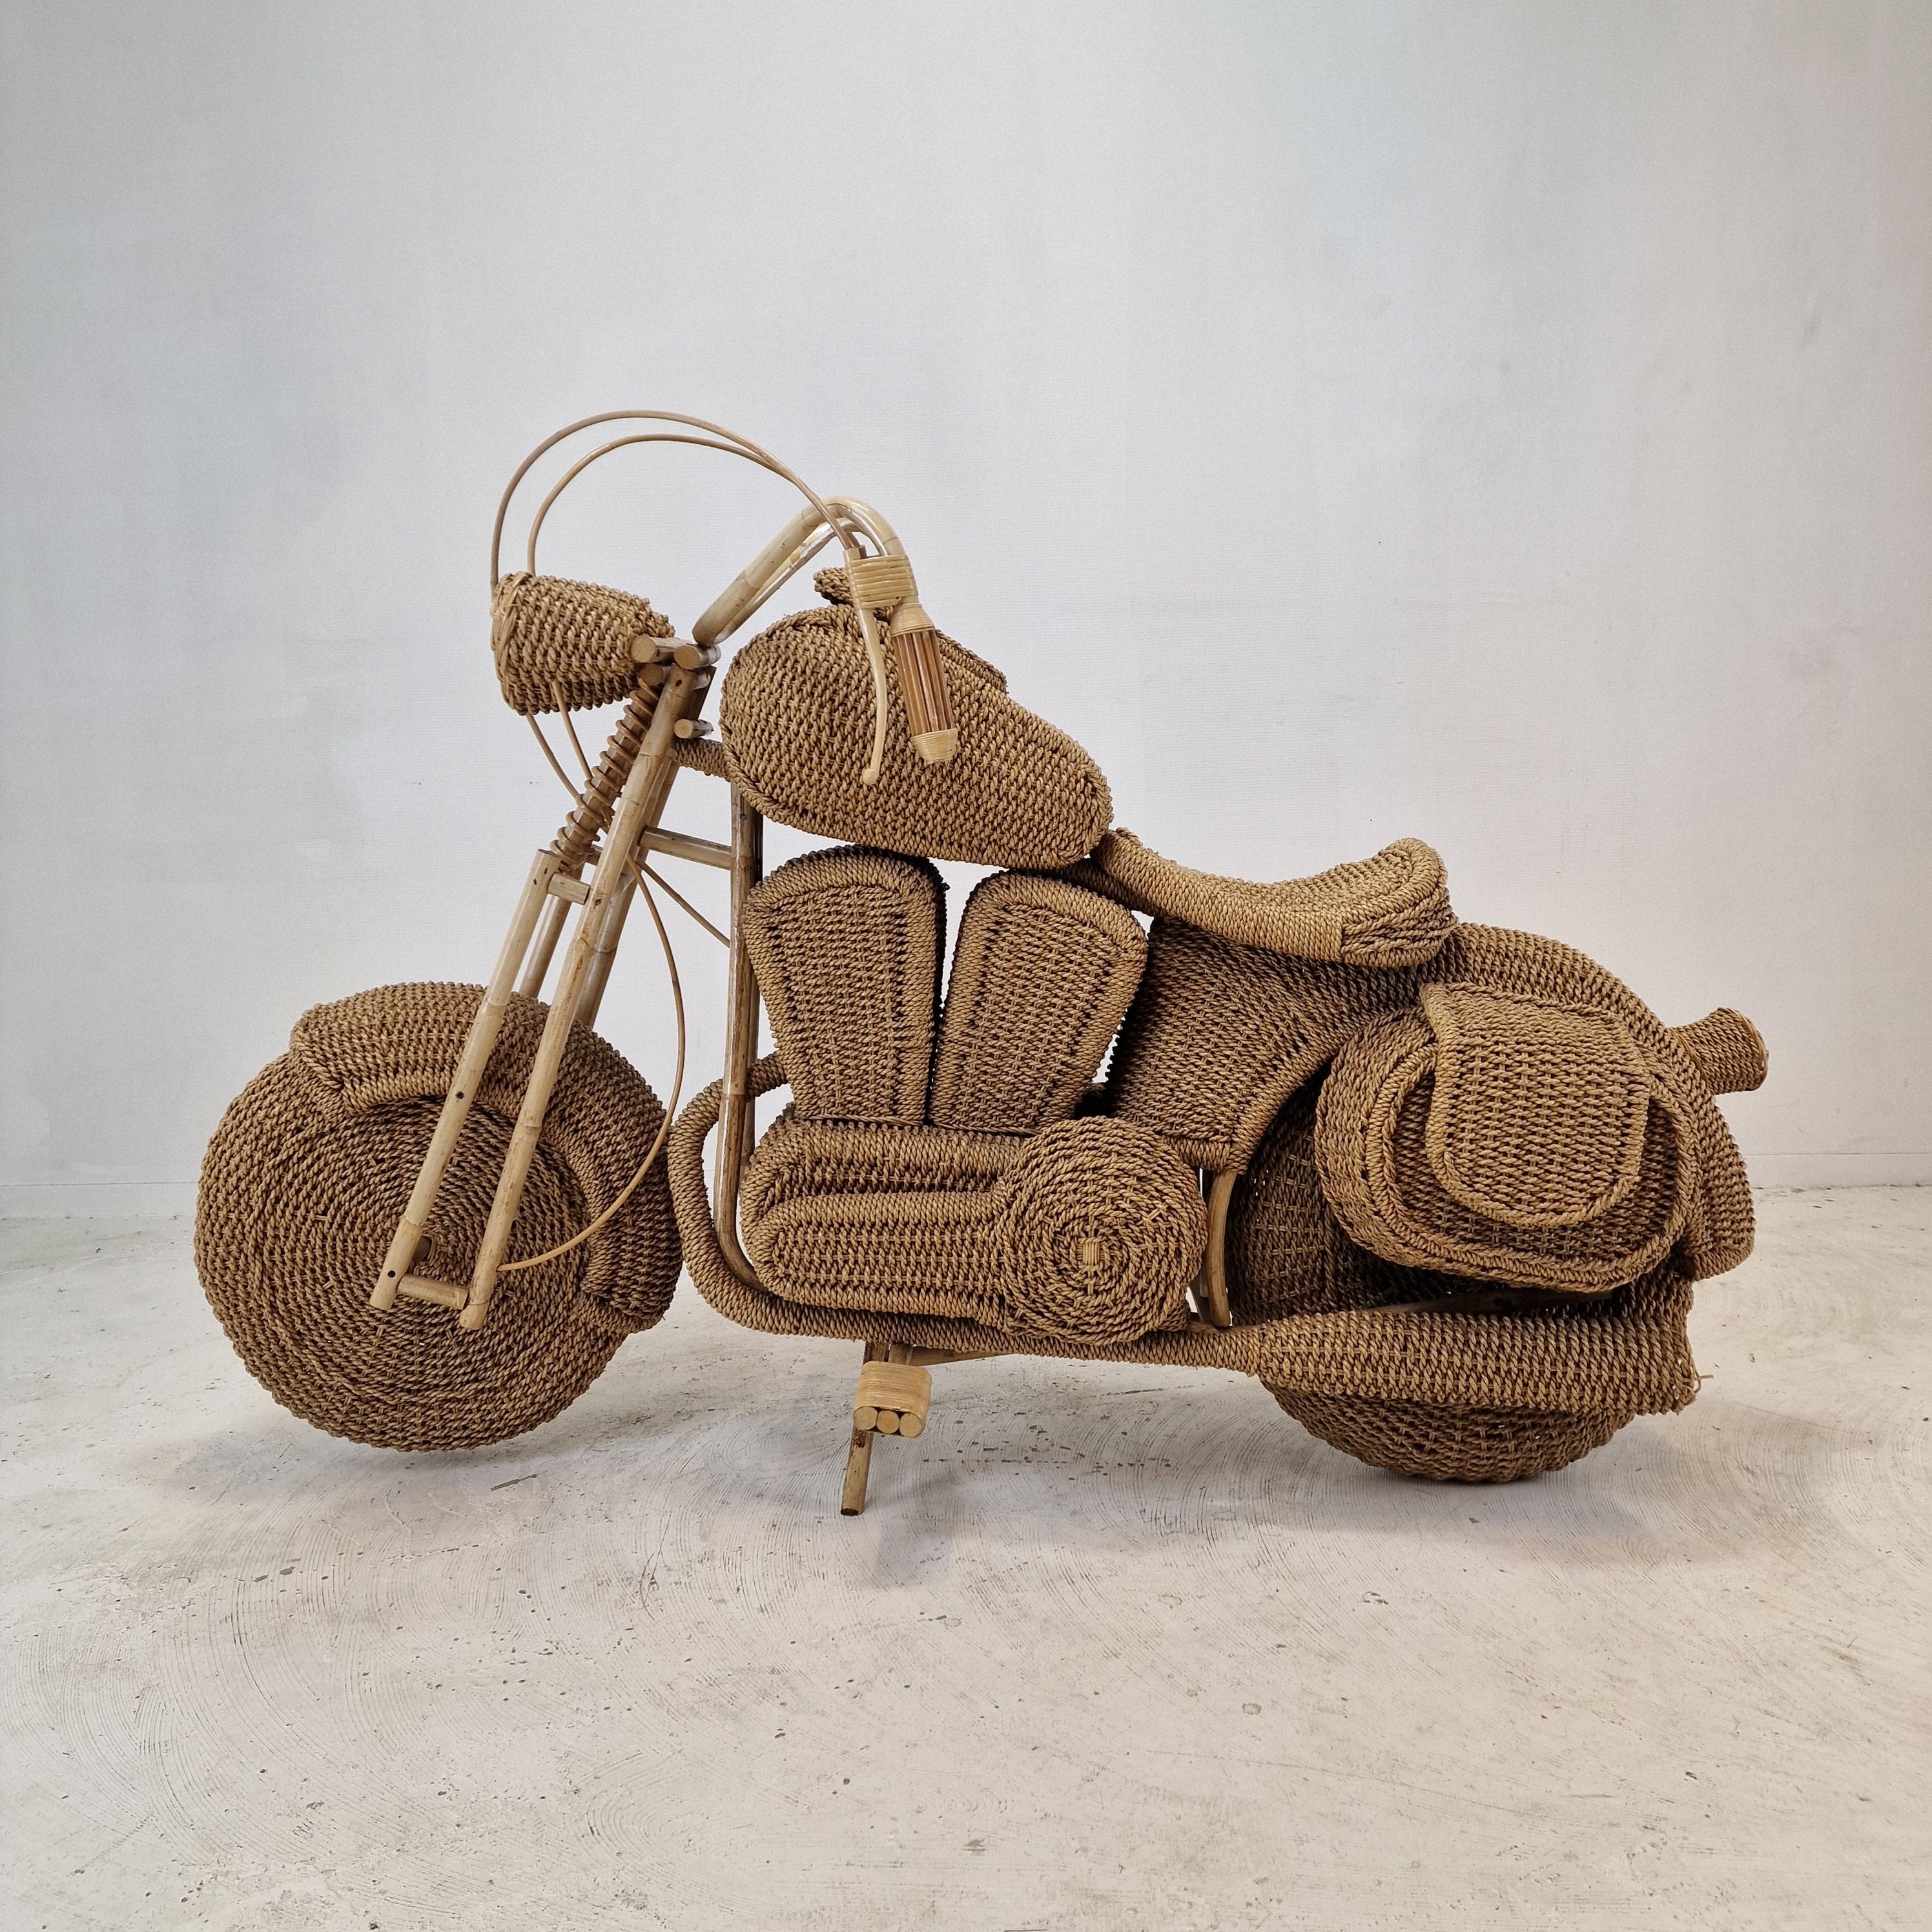 Life size Harley Davidson rattan model of a motorcycle, attributed to Tom Dixon USA, Circa 1980s  

Hand-made sculpture of a motorcycle of woven rattan, willow, reed and wood. 

This model was reportedly used as display used in Habitat stores in the